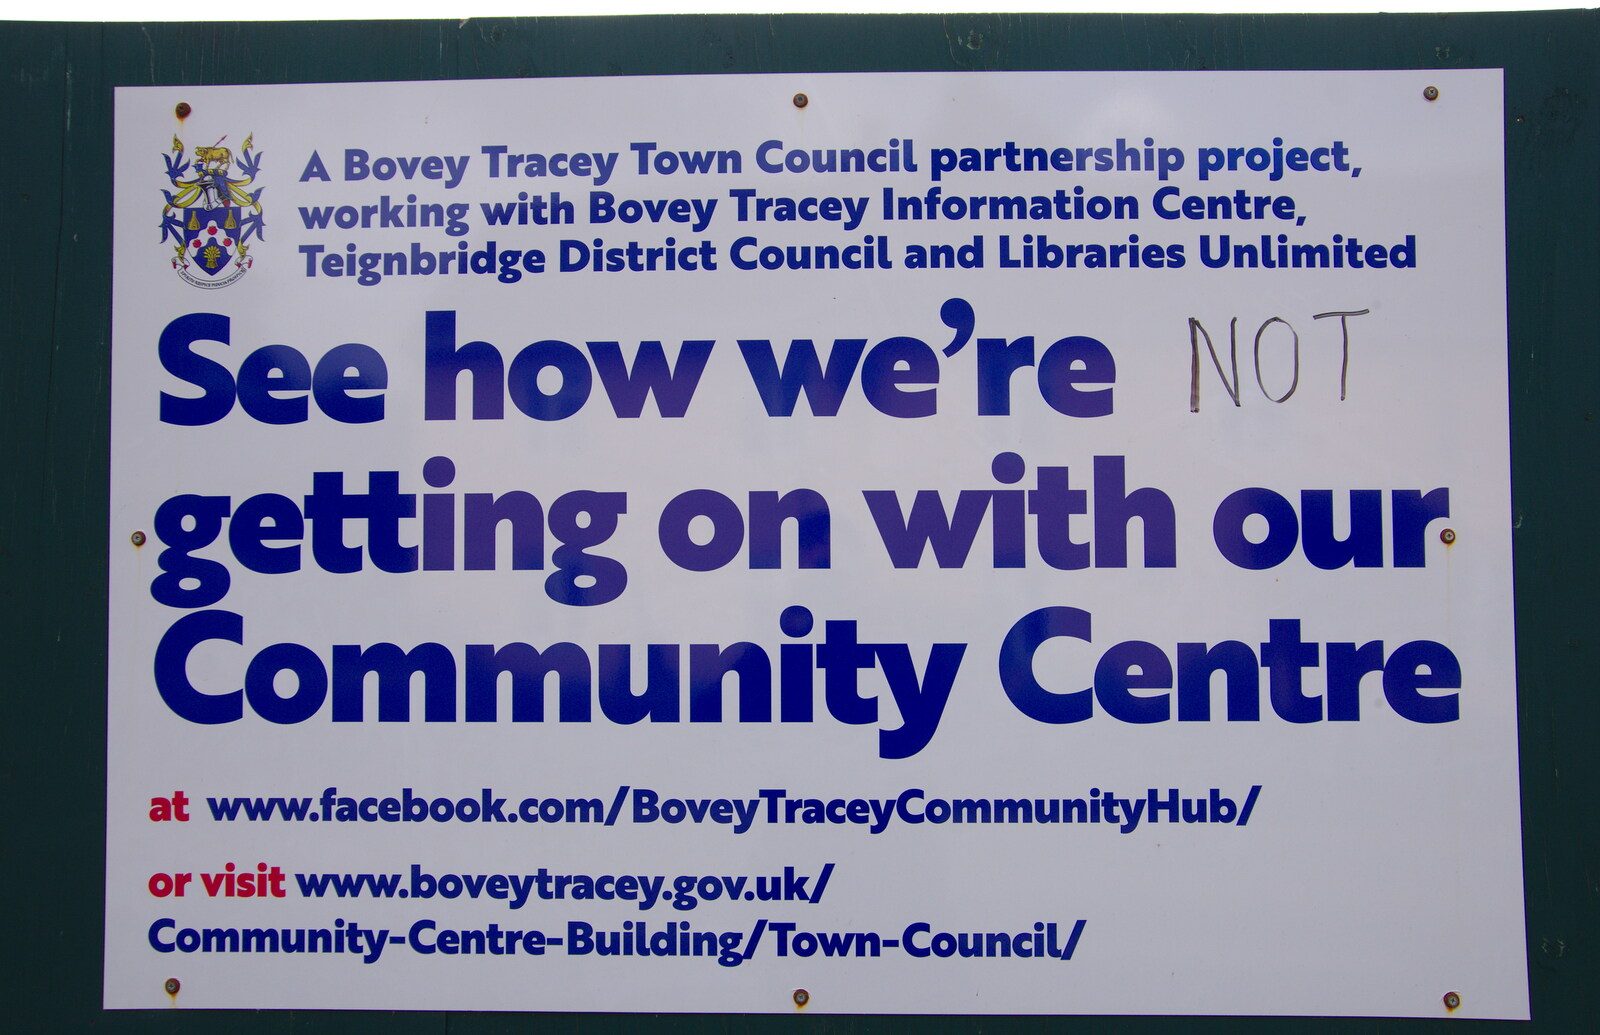 Political comment about Bovey's community centre from The Tom Cobley and a Return to Haytor, Bovey Tracey, Devon - 27th May 2019